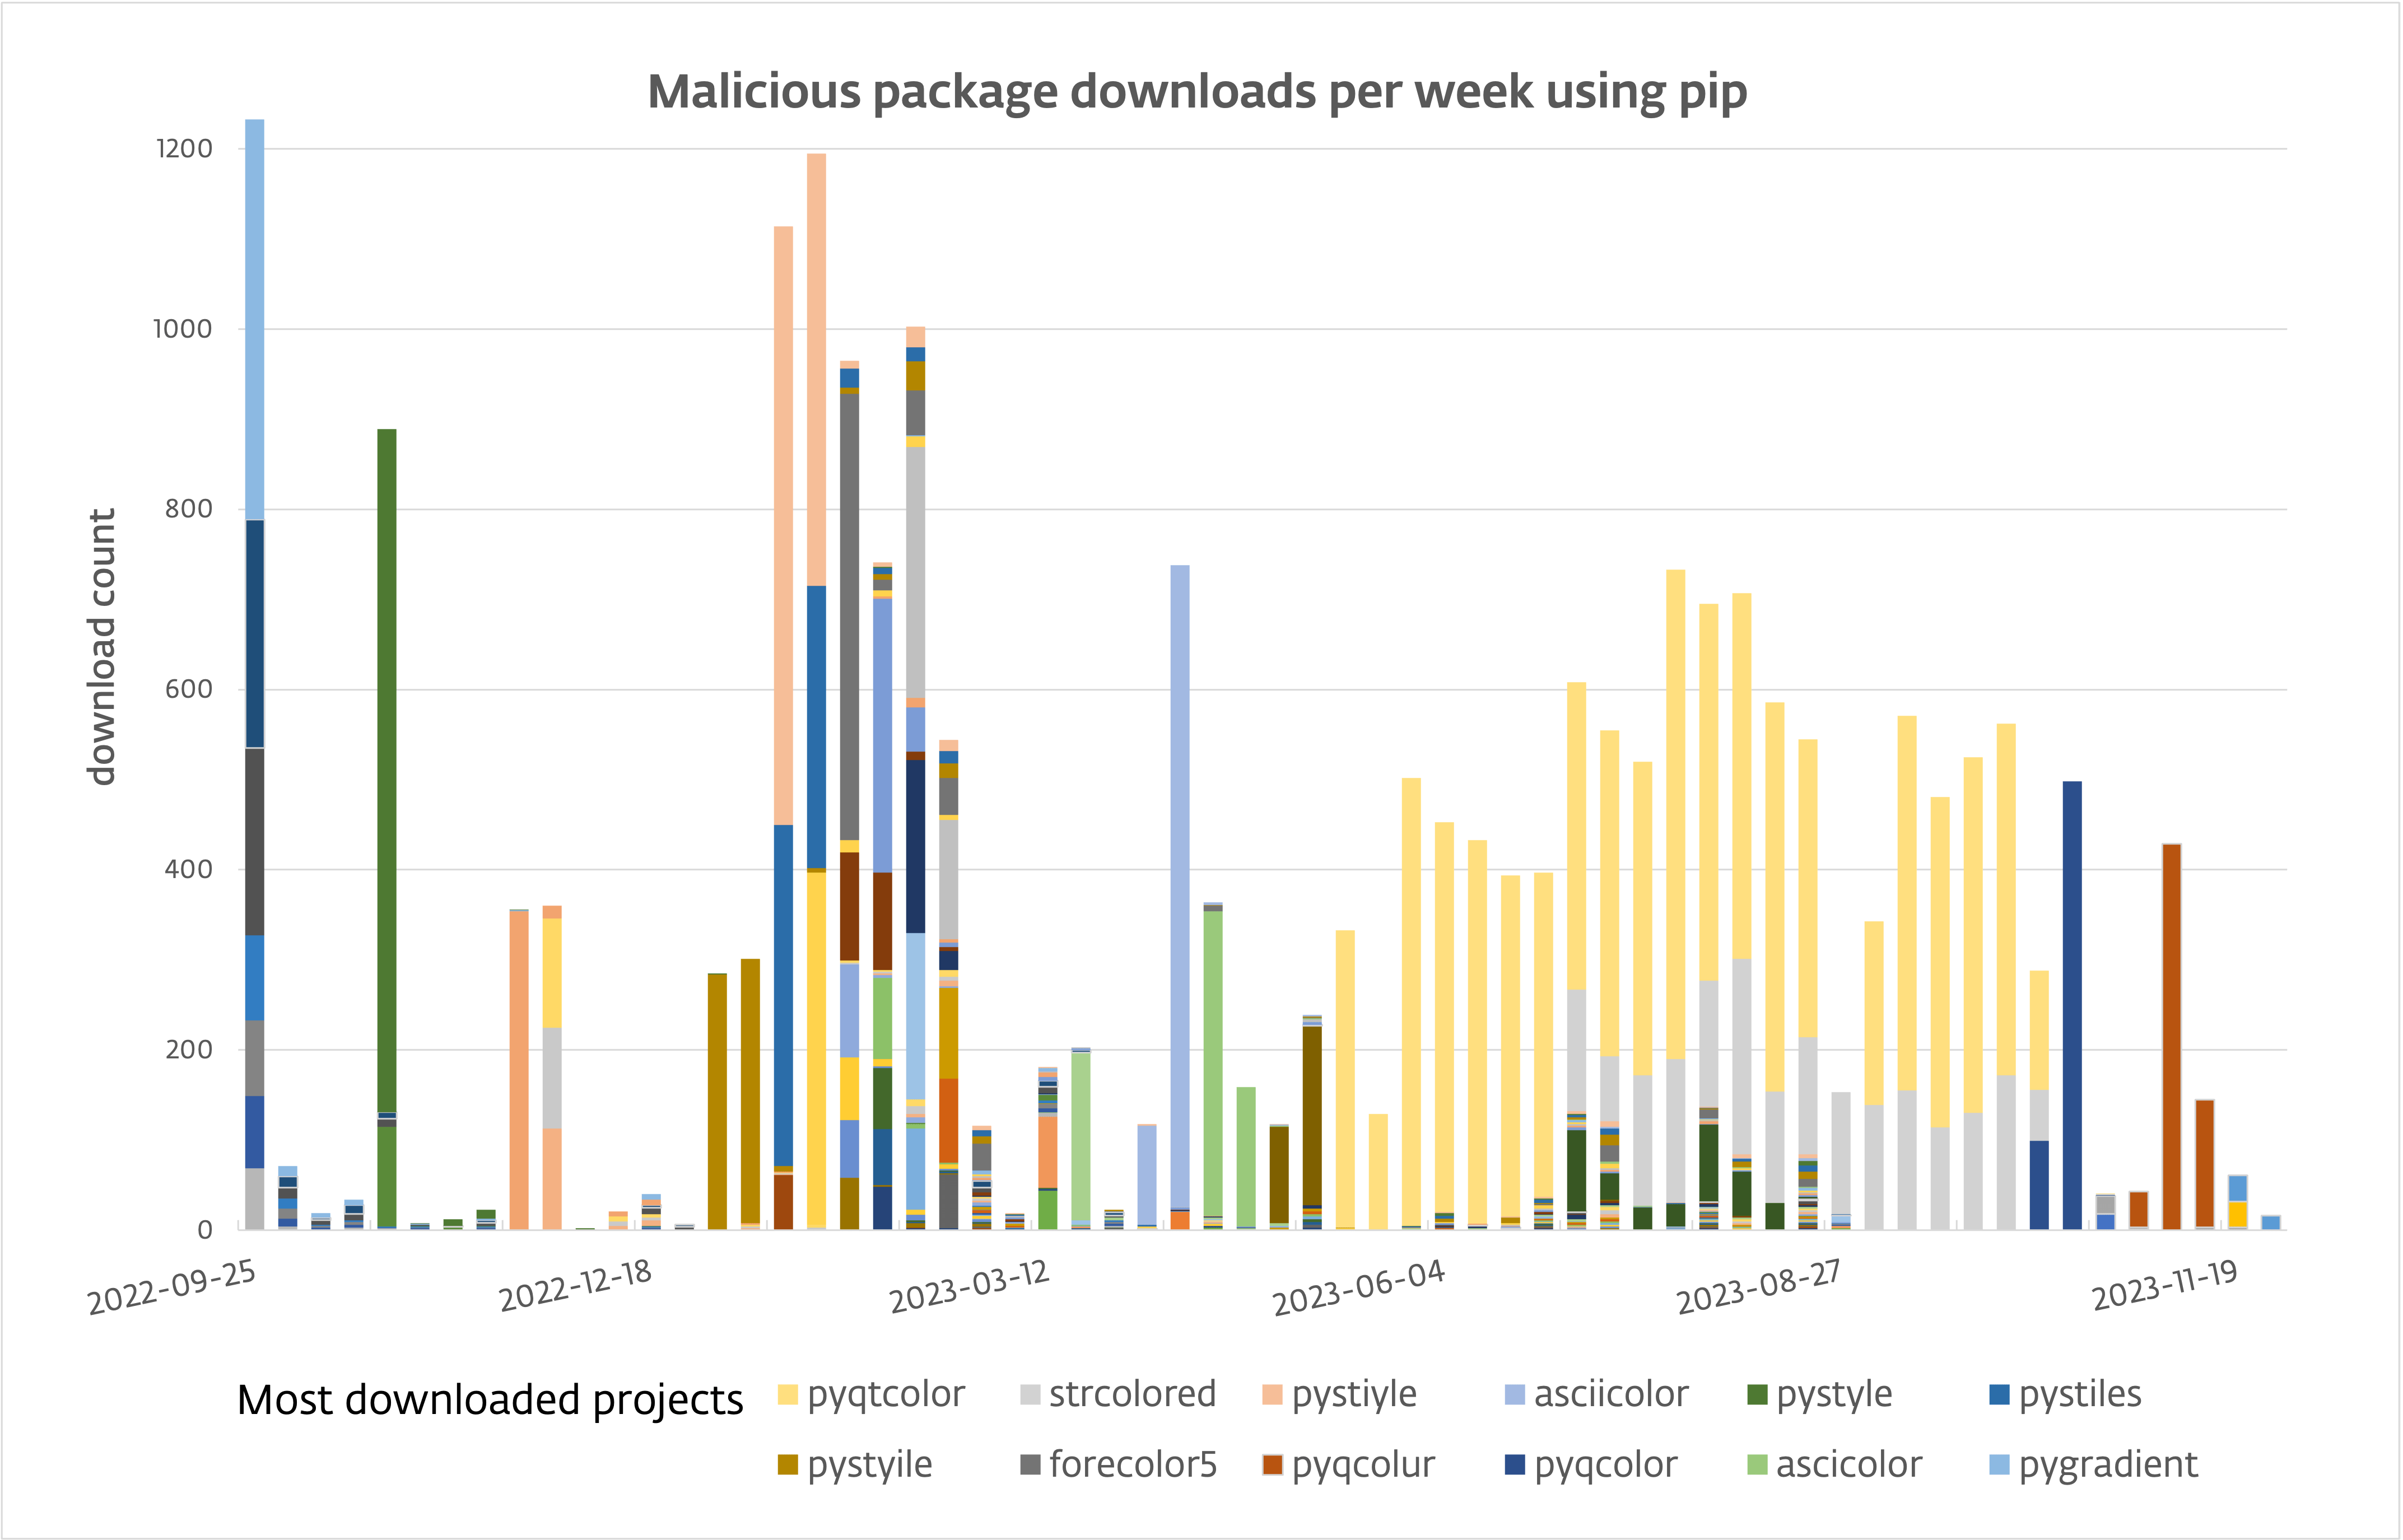 Figure 1 Malicious package downloads from PyPI using pip